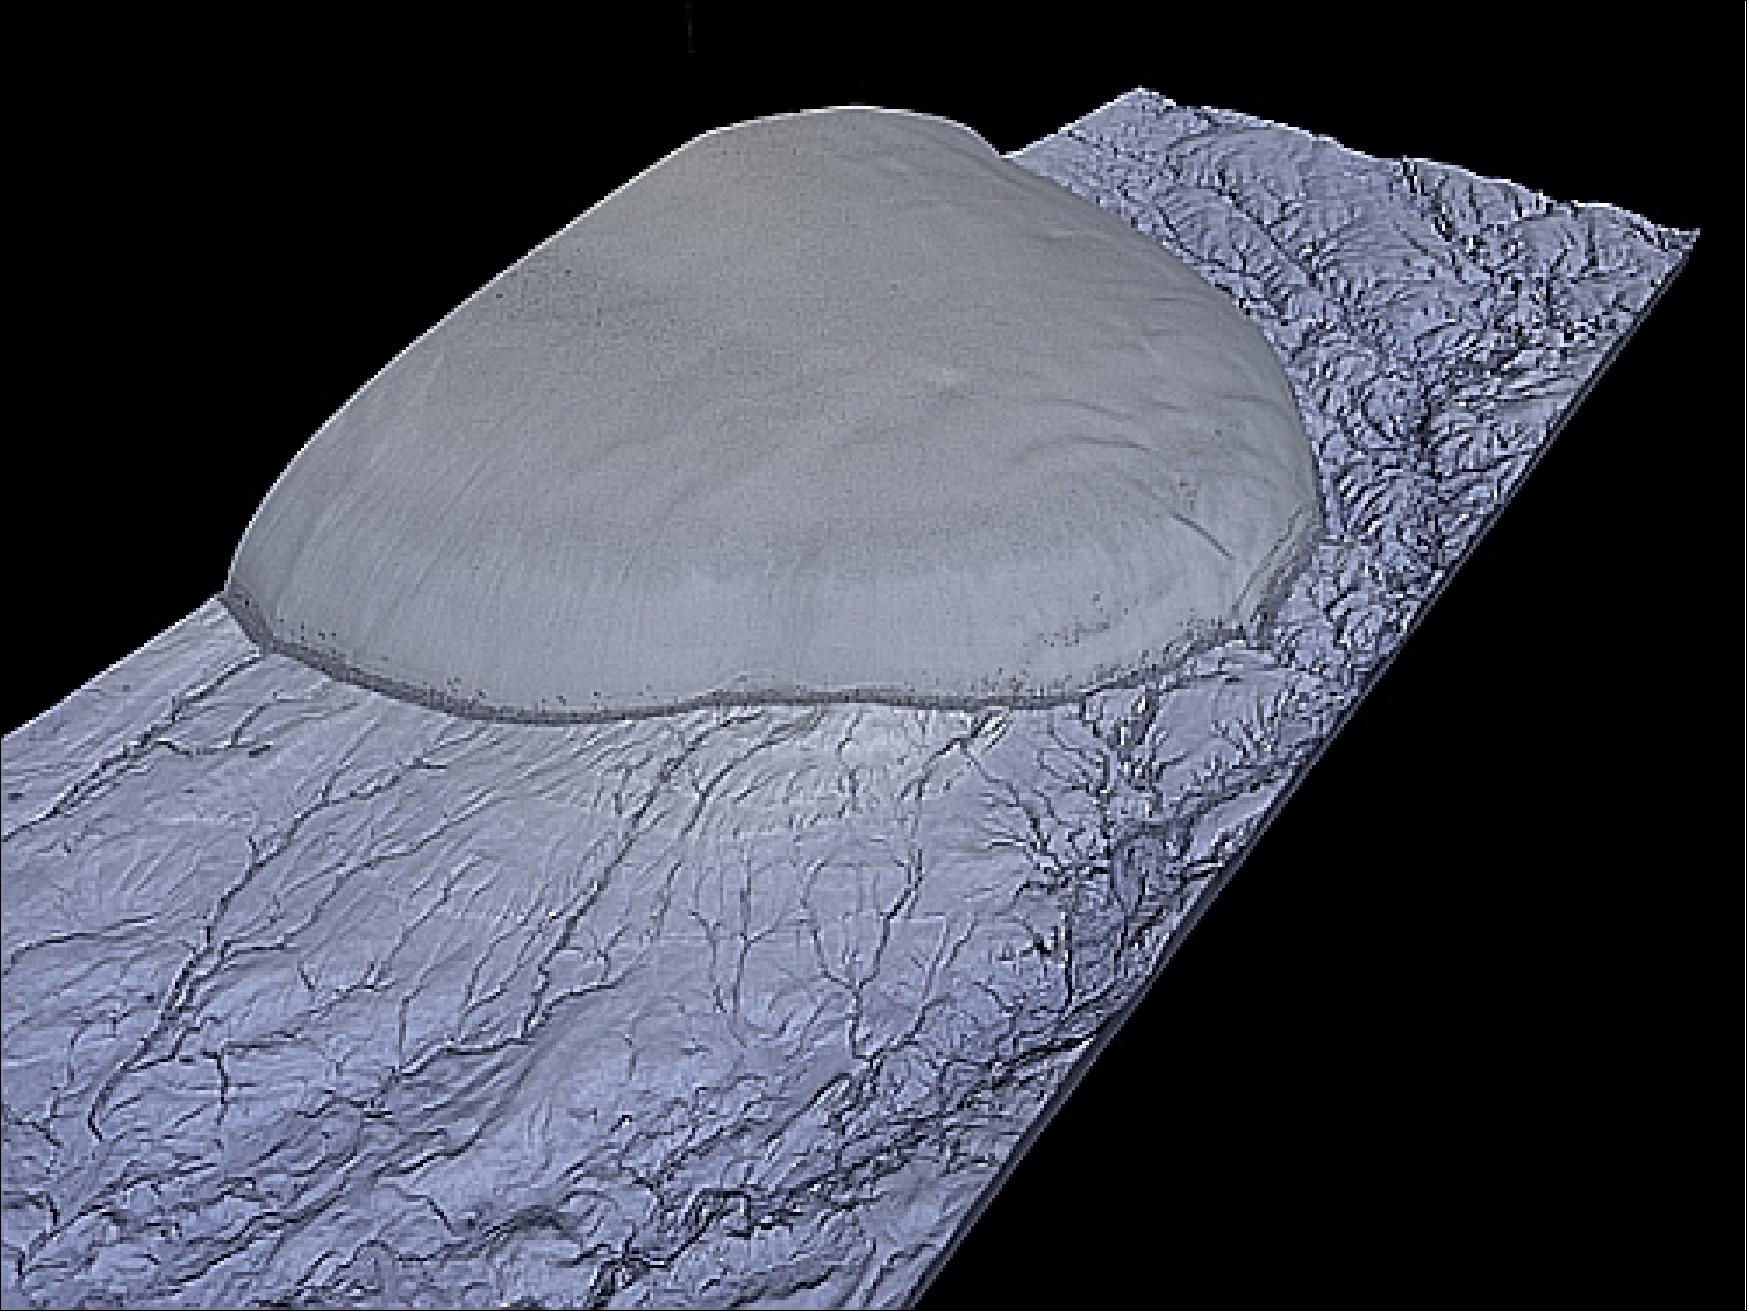 Figure 81: Digital elevation model of an ice cap in the middle of October Revolution Island (image credit: DLR)